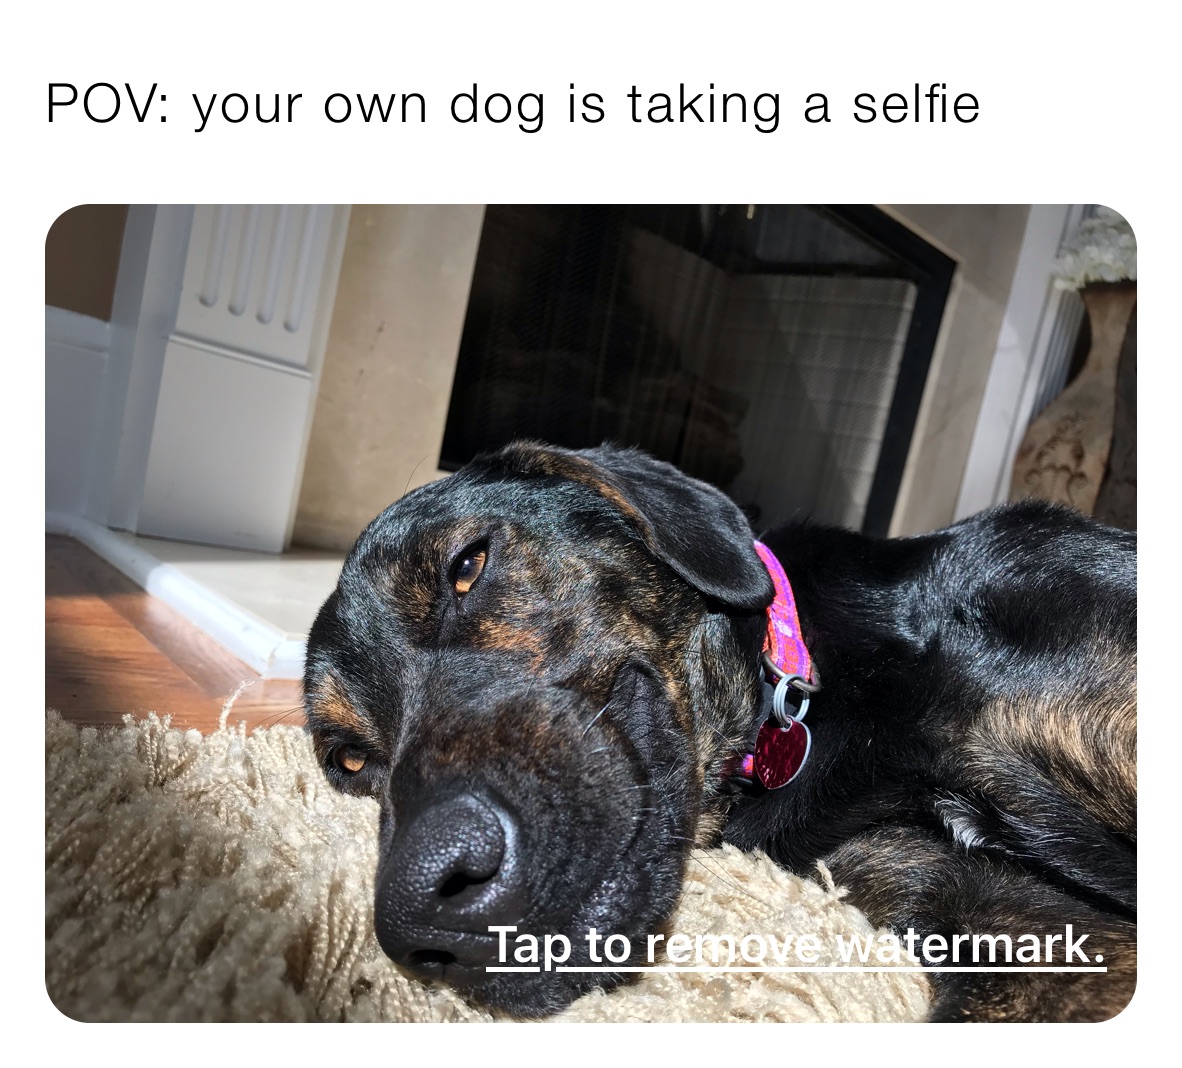 POV: your own dog is taking a selfie